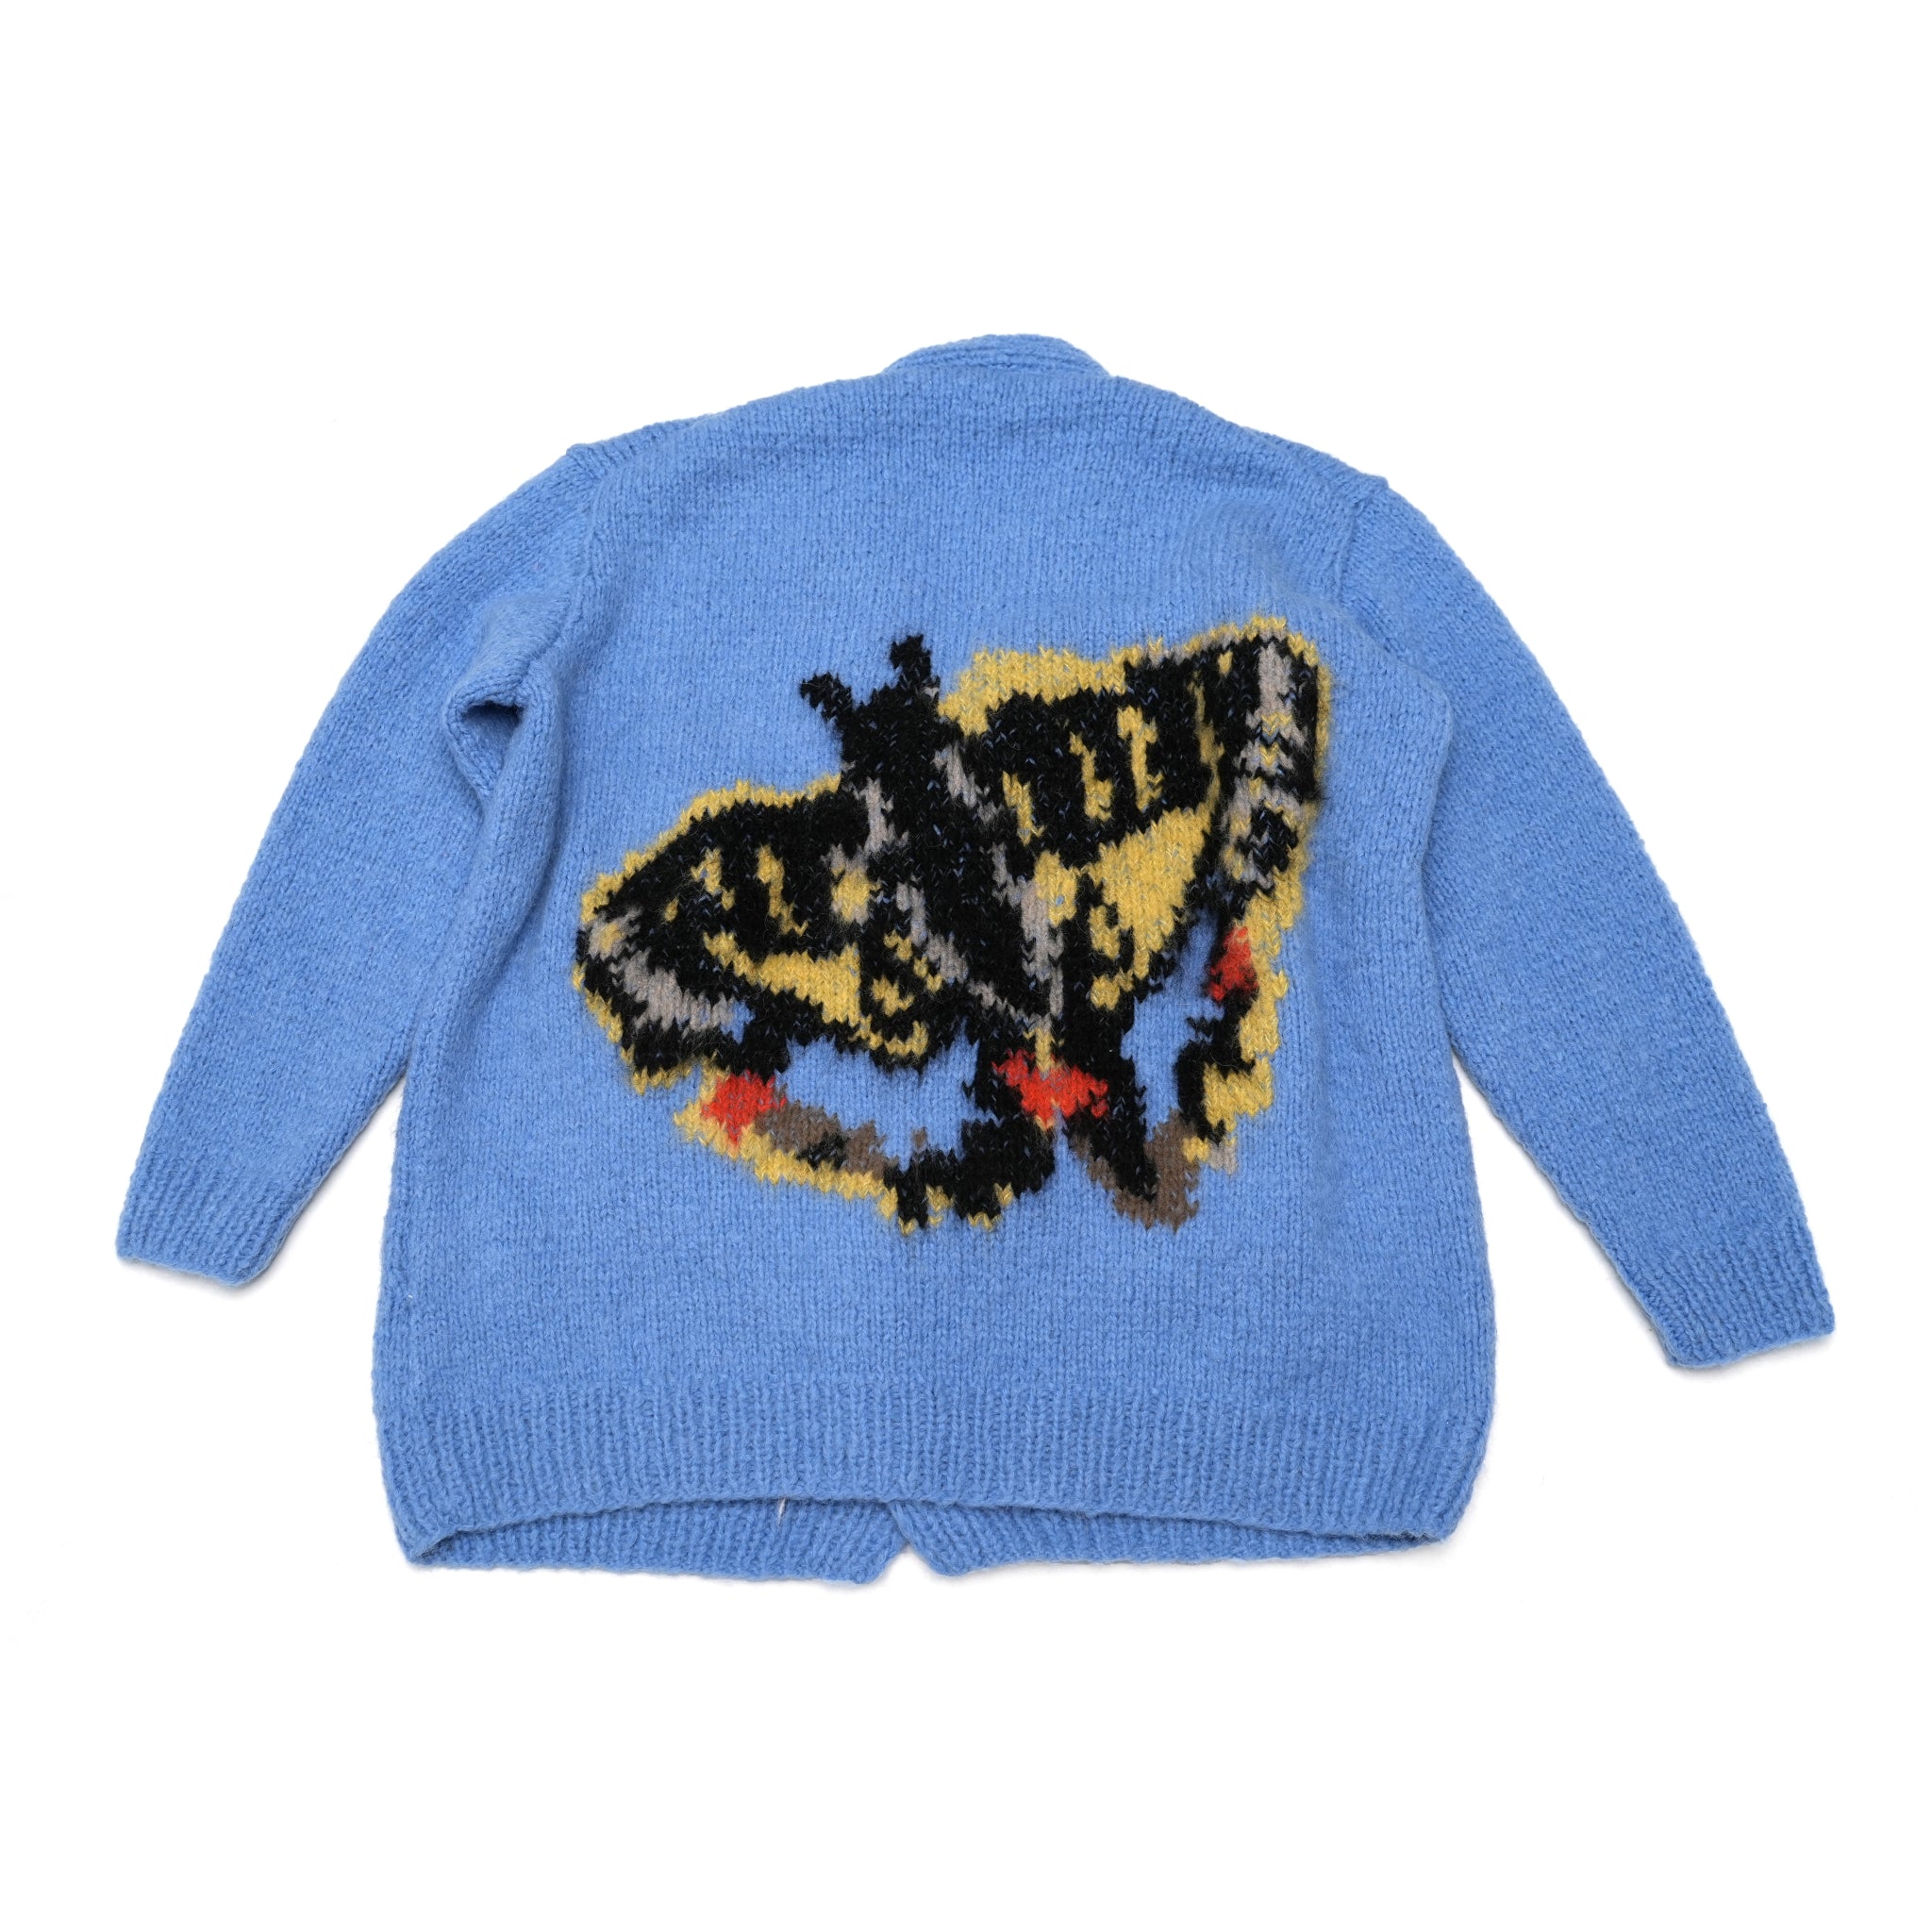 No:WA2-Cardigan-BB | Name:Butterfly Butterfly | Type:Cardigan | Color:Blue【WILD ANIMALS_ワイルドアニマルズ】